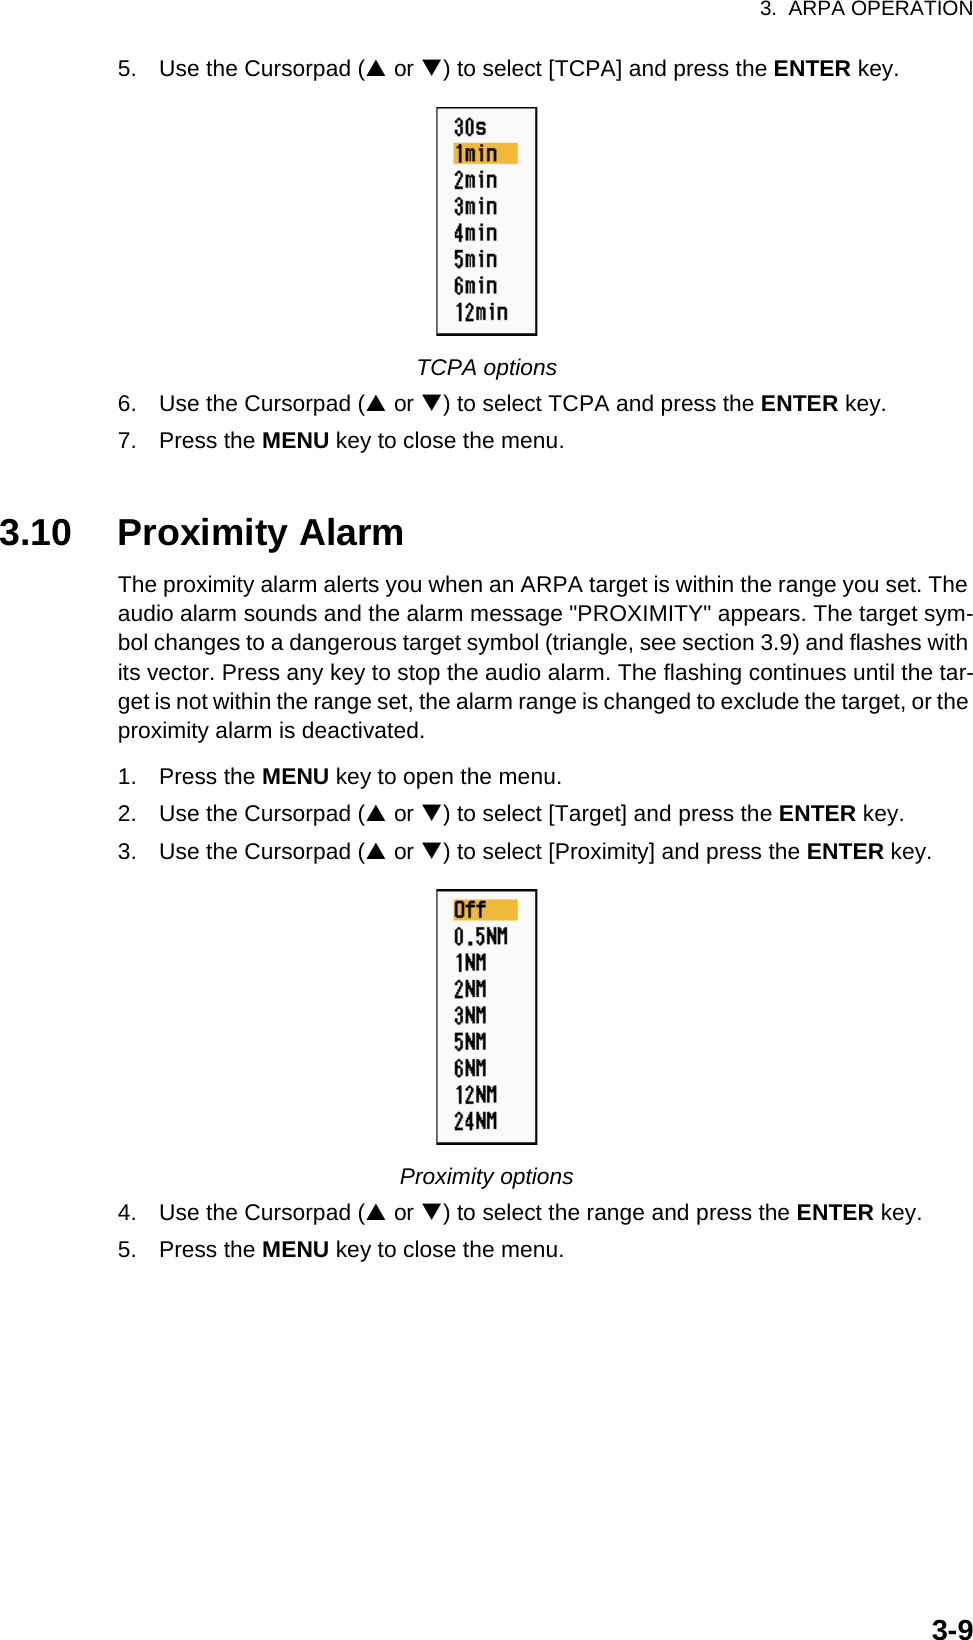 3.  ARPA OPERATION3-95. Use the Cursorpad (S or T) to select [TCPA] and press the ENTER key.TCPA options6. Use the Cursorpad (S or T) to select TCPA and press the ENTER key.7. Press the MENU key to close the menu.3.10 Proximity AlarmThe proximity alarm alerts you when an ARPA target is within the range you set. The audio alarm sounds and the alarm message &quot;PROXIMITY&quot; appears. The target sym-bol changes to a dangerous target symbol (triangle, see section 3.9) and flashes with its vector. Press any key to stop the audio alarm. The flashing continues until the tar-get is not within the range set, the alarm range is changed to exclude the target, or the proximity alarm is deactivated.1. Press the MENU key to open the menu.2. Use the Cursorpad (S or T) to select [Target] and press the ENTER key.3. Use the Cursorpad (S or T) to select [Proximity] and press the ENTER key.Proximity options4. Use the Cursorpad (S or T) to select the range and press the ENTER key.5. Press the MENU key to close the menu.